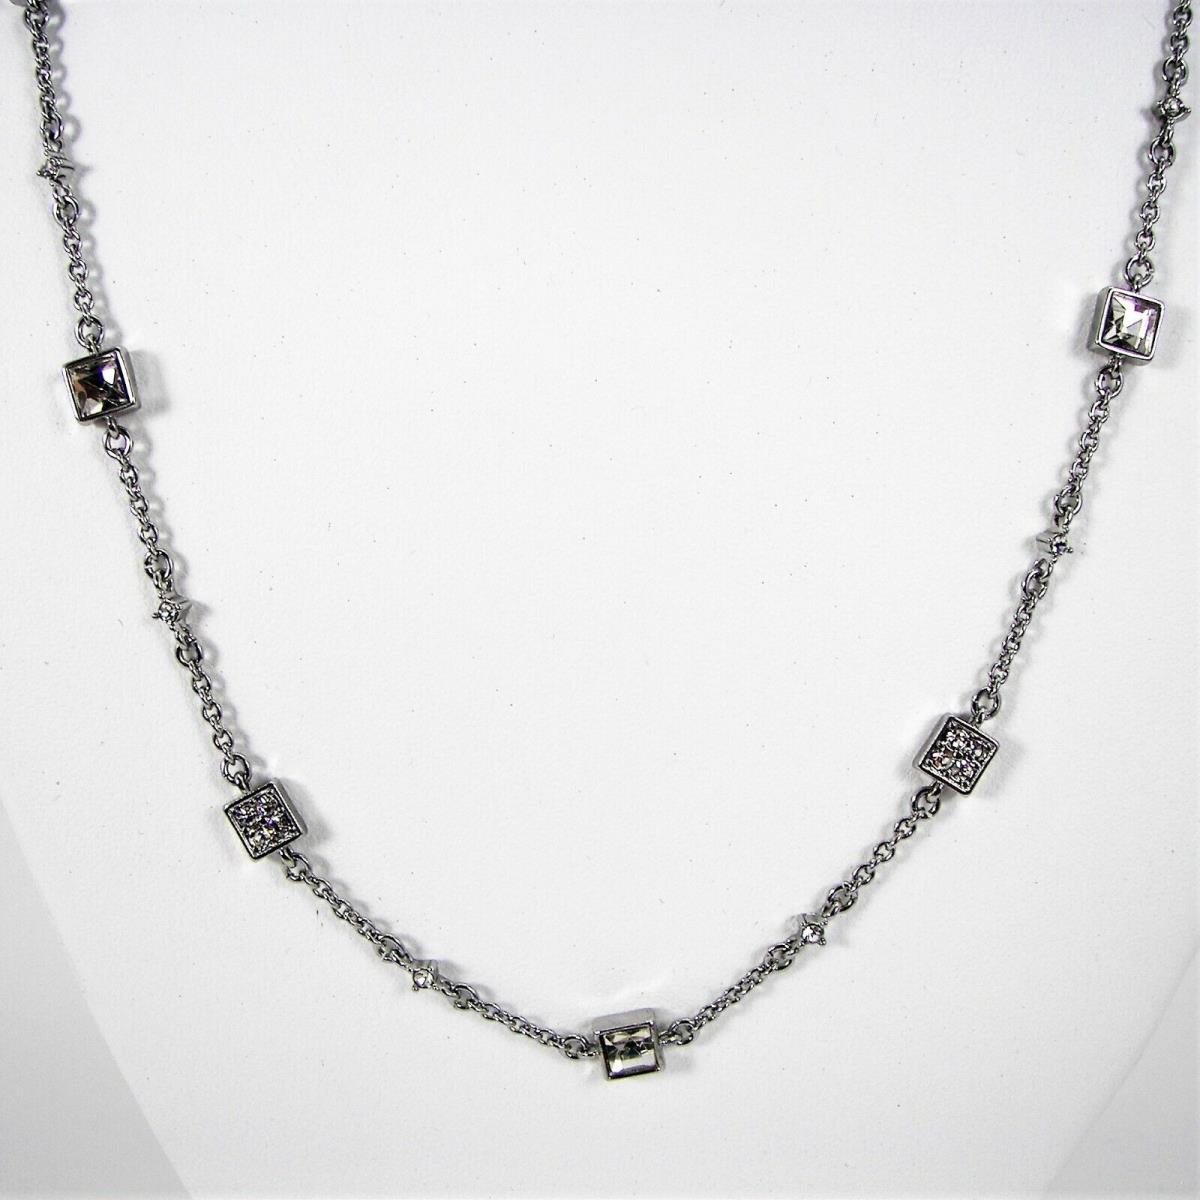 Lauren Ralph Lauren Starry Night Square Crystal Long Necklace Silver Tone Cha